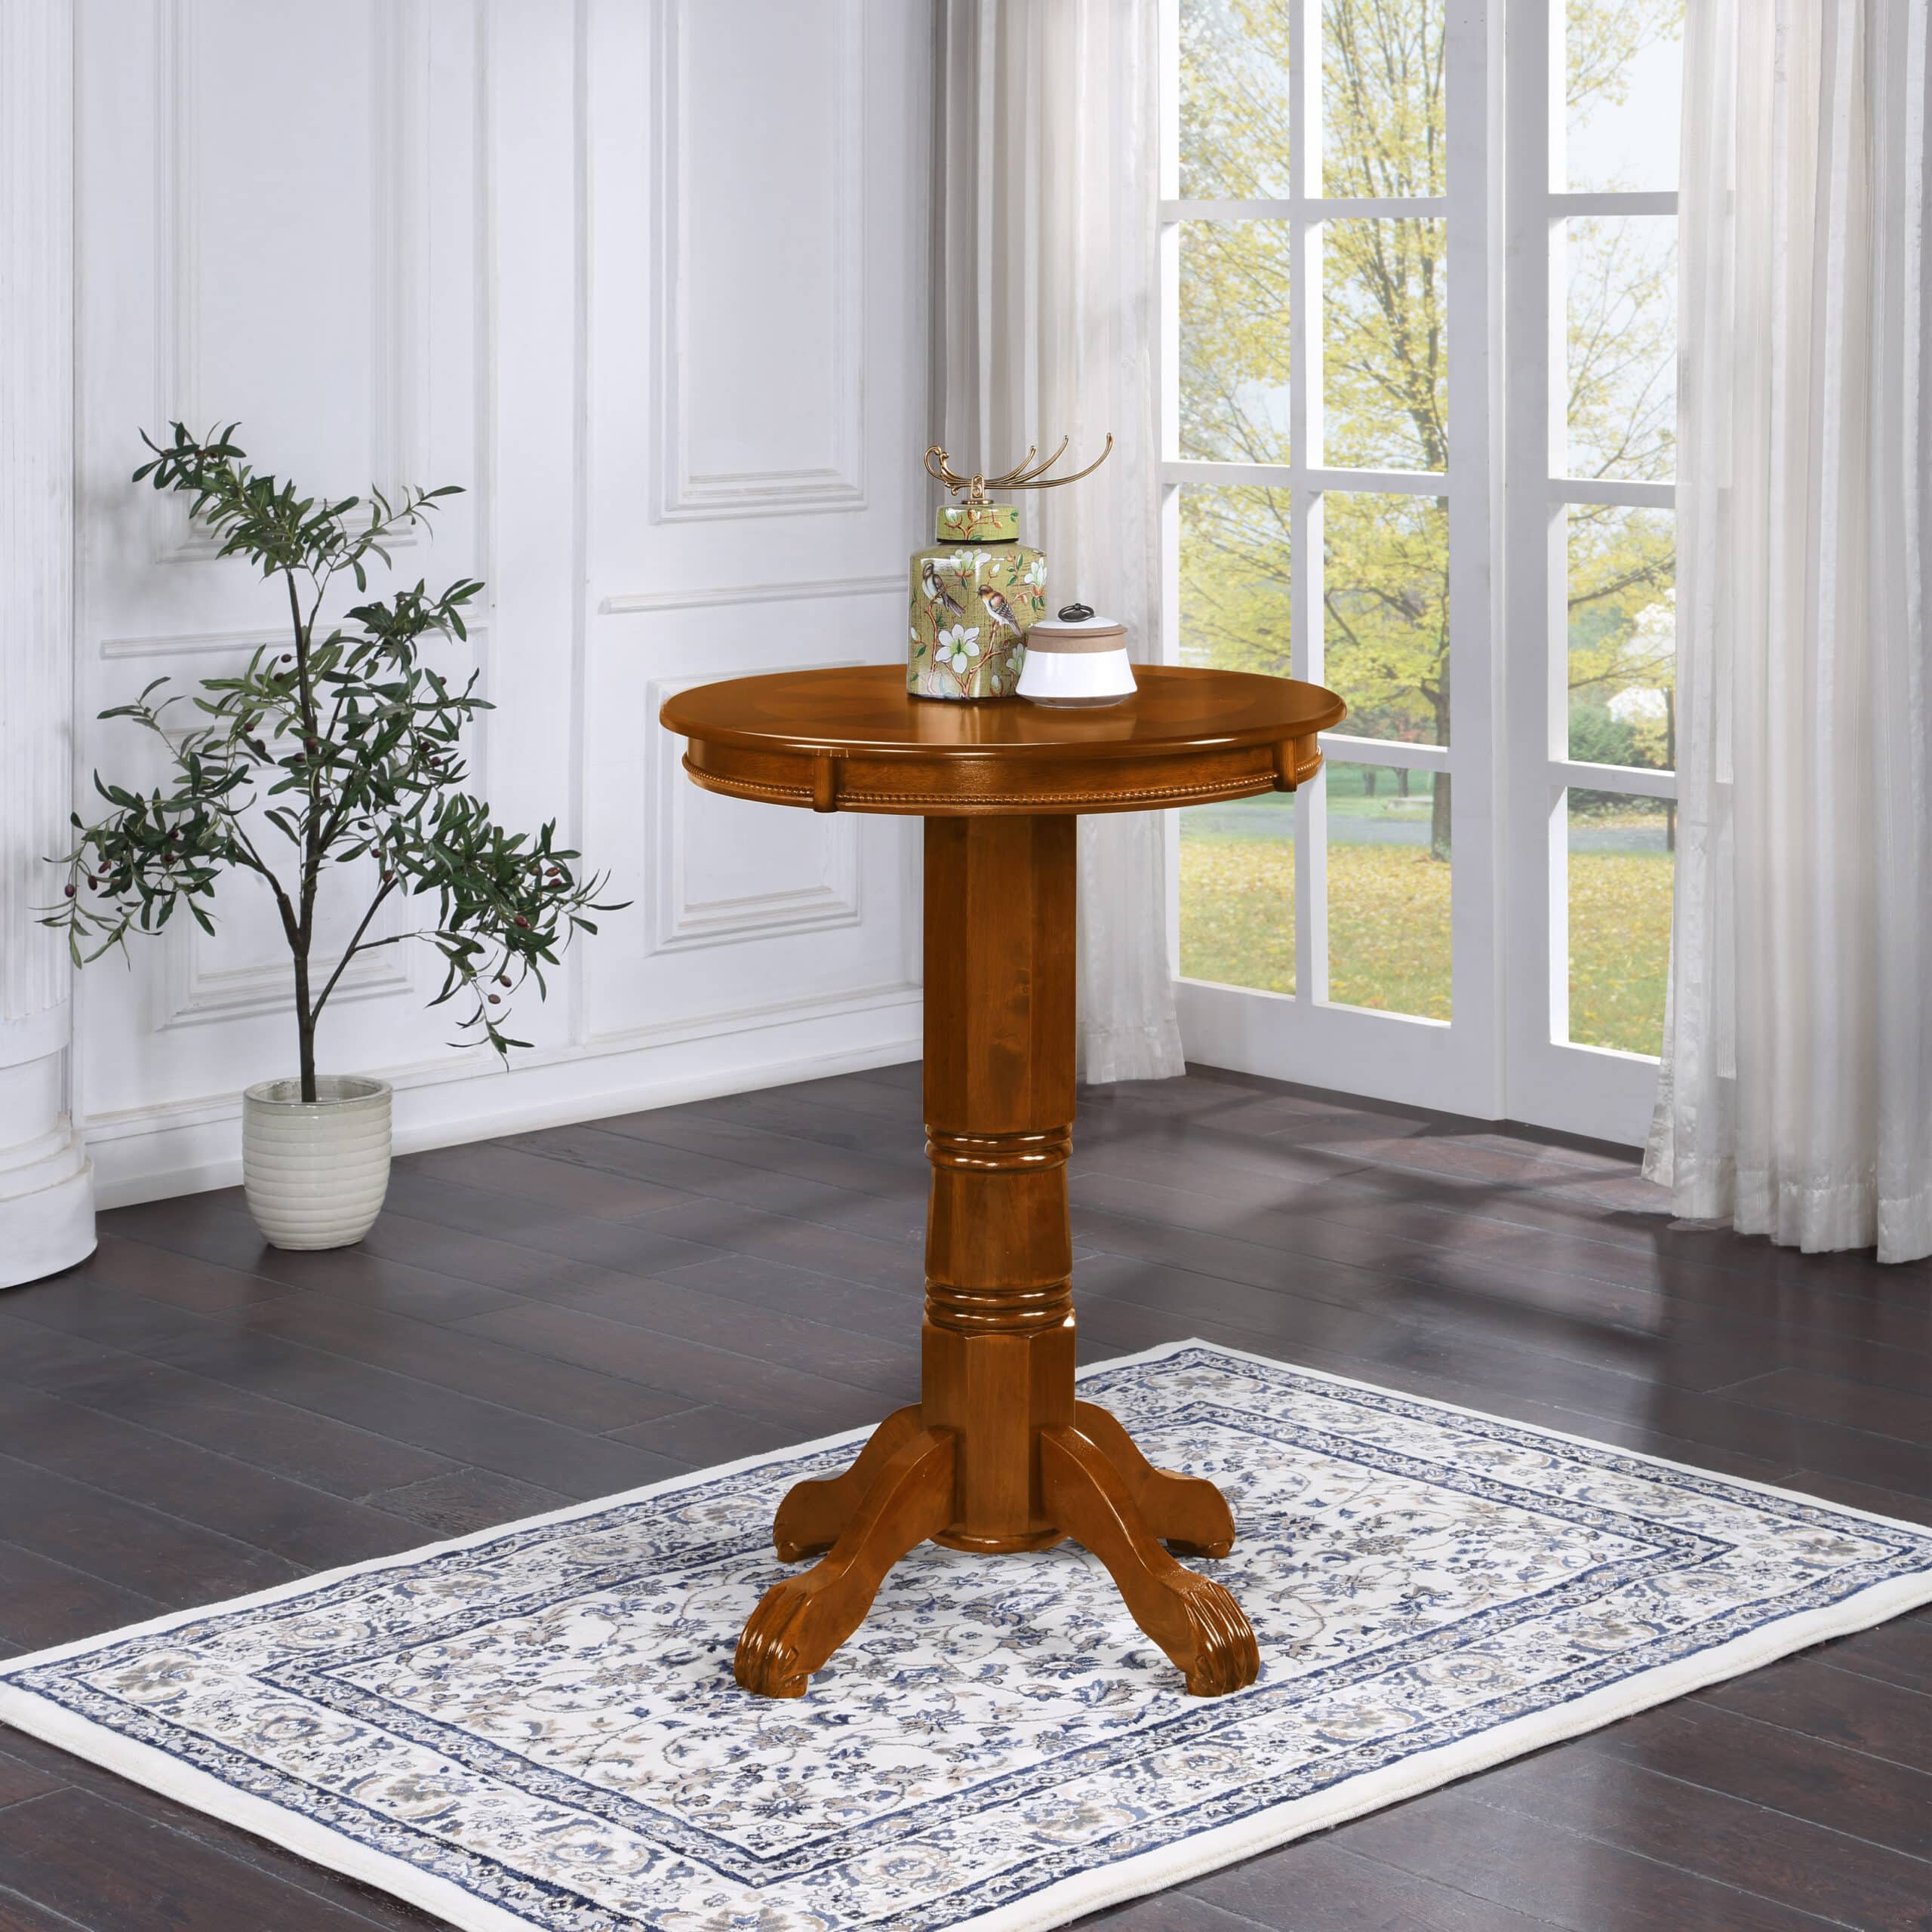 Boraam Florence 42in. Height Round Wood Pub Table - Cherry Finish - image 1 of 6